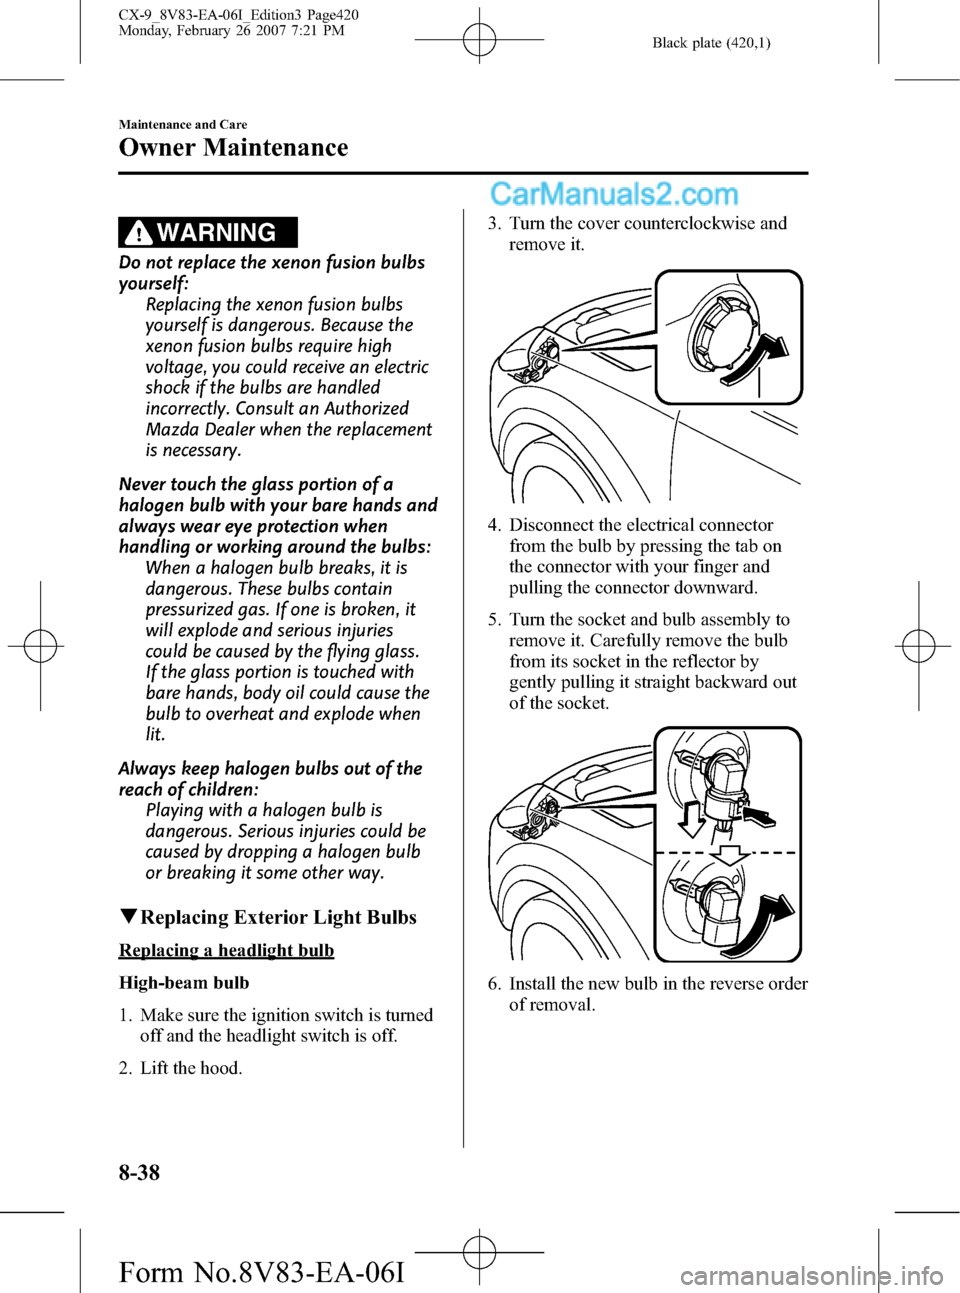 MAZDA MODEL CX-9 2007  Owners Manual (in English) Black plate (420,1)
WARNING
Do not replace the xenon fusion bulbs
yourself:
Replacing the xenon fusion bulbs
yourself is dangerous. Because the
xenon fusion bulbs require high
voltage, you could recei